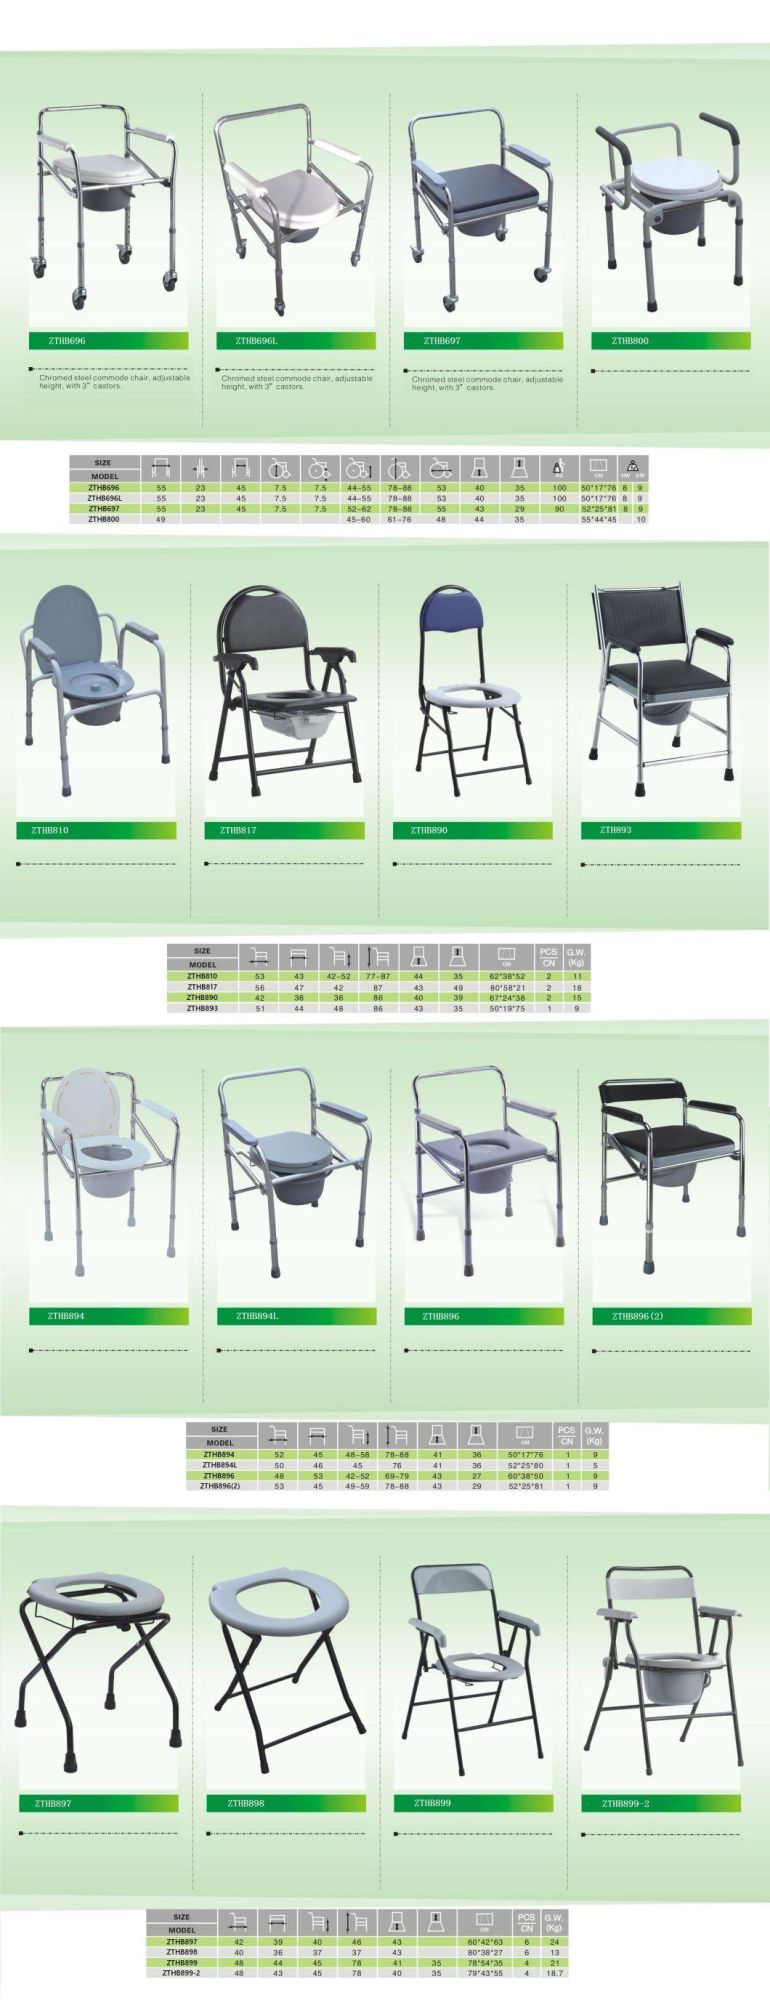 Pregnant Woman Home Care Antiskid Height Adjust Lightweight Commode Toilet Chair Elderly/Disable Patient People Rehabilitation Products Nursing Safety Seat